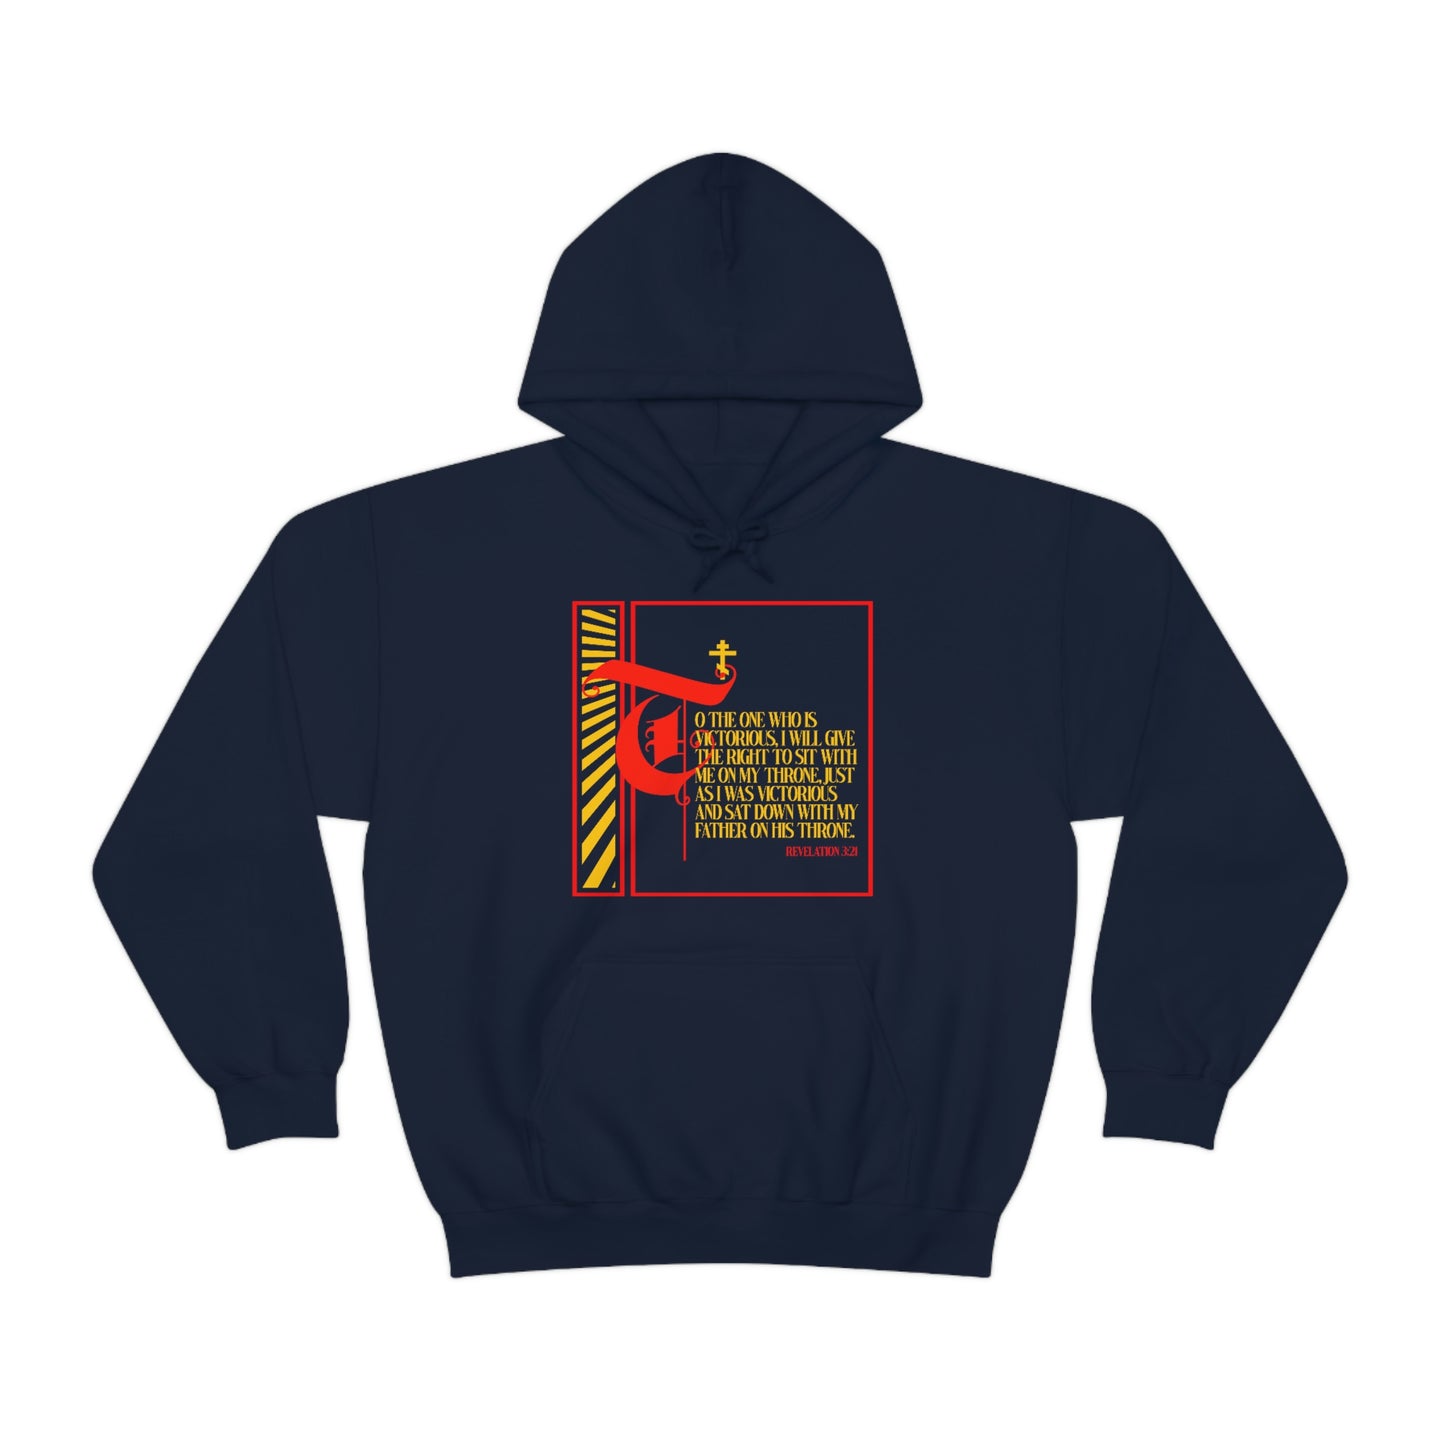 To the One Who Is Victorious No. 6 | Orthodox Christian Hoodie / Hooded Sweatshirt